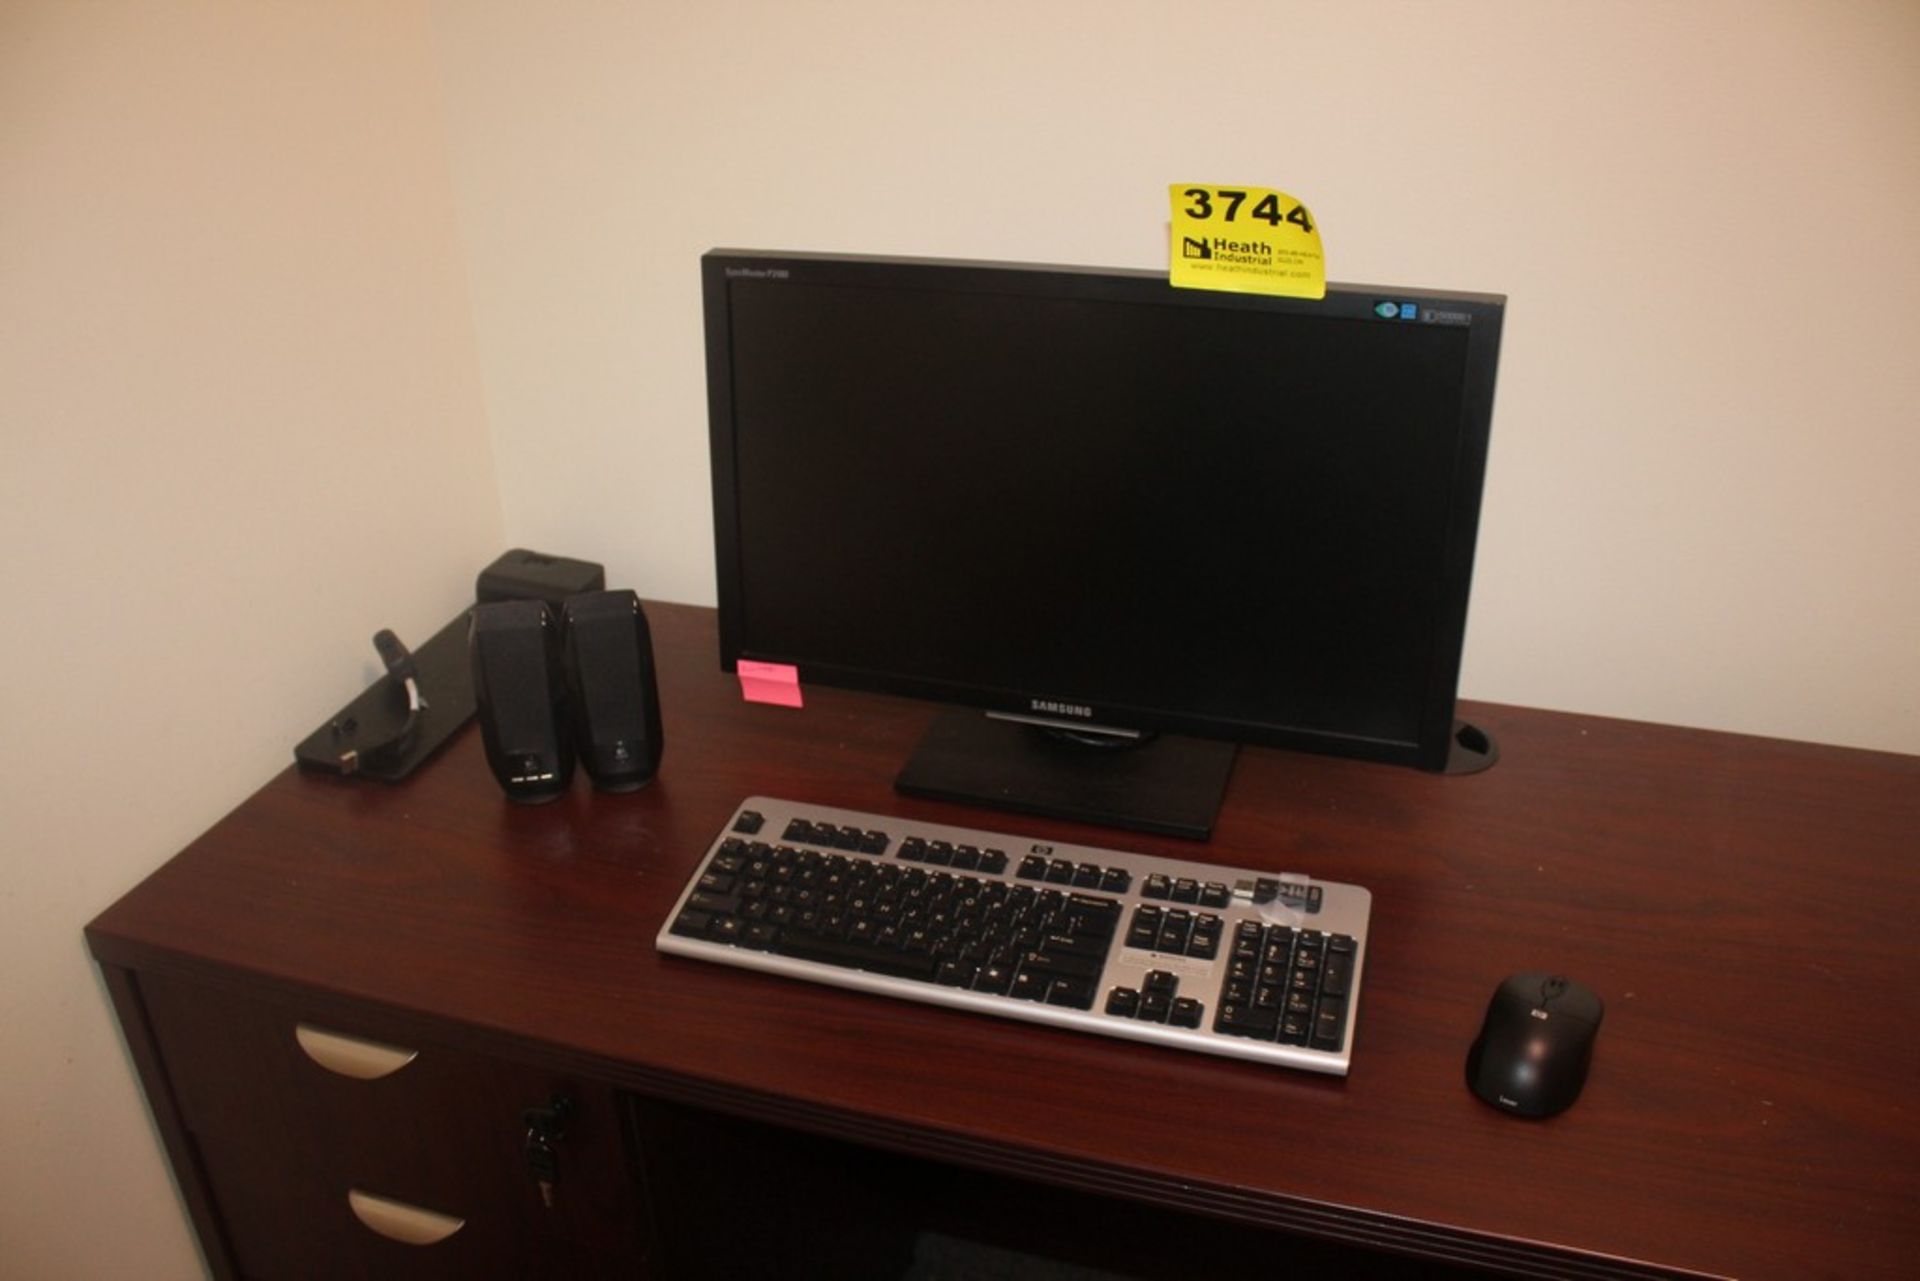 SAMSUNG 23" MONITOR WITH KEYBOARD, MOUSE, SPEAKERS